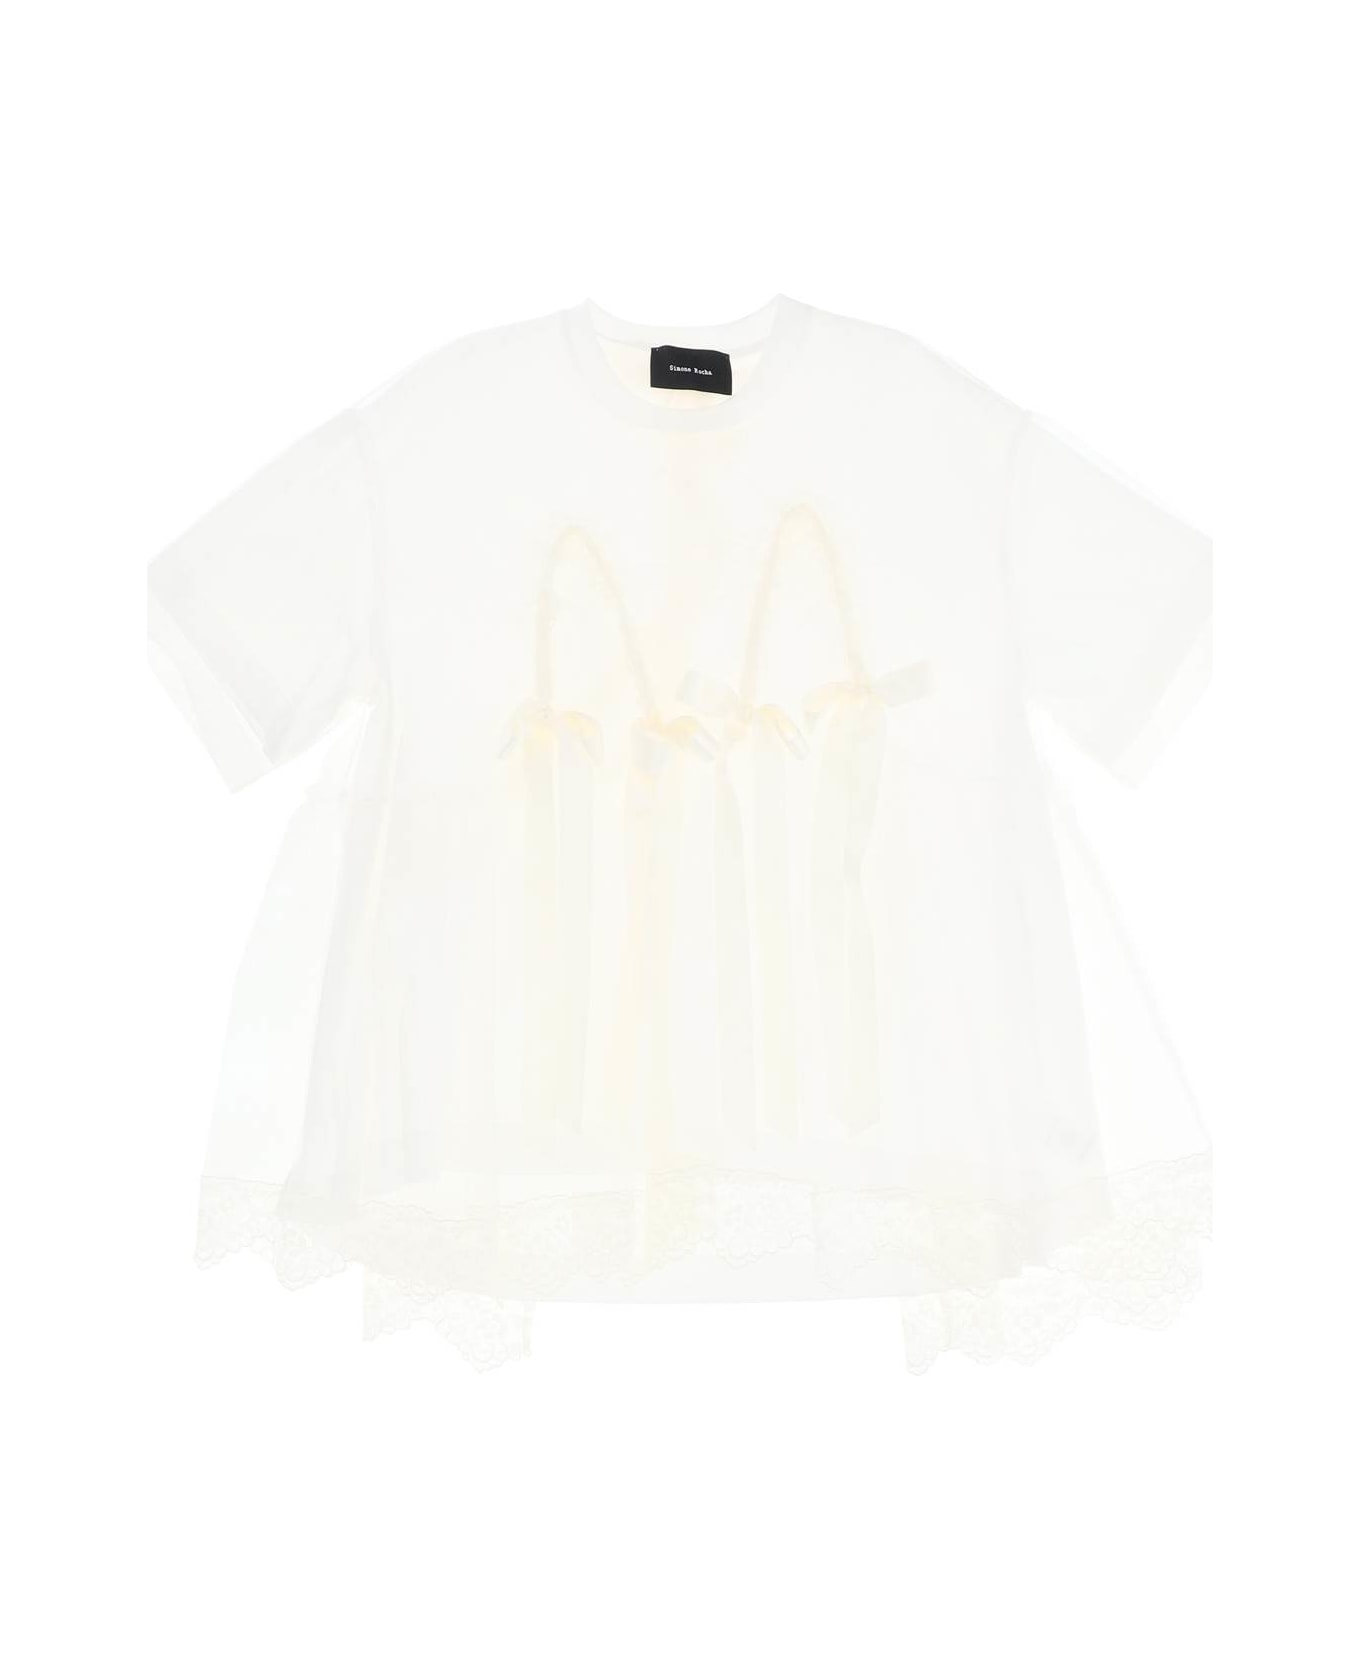 Simone Rocha Tulle Top With Lace And Bows - WHITE (White) トップス